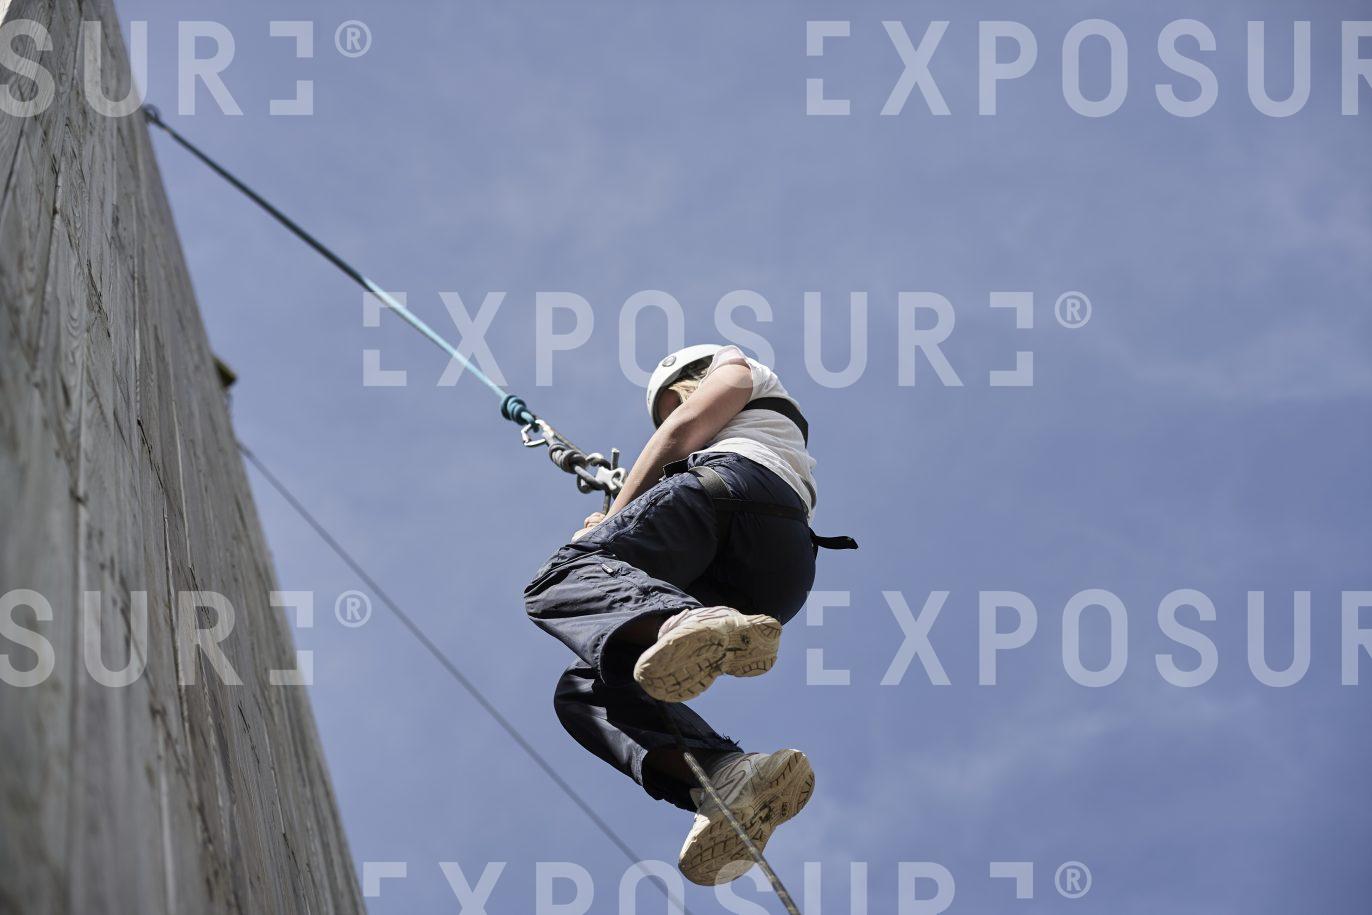 A young girl abseiling